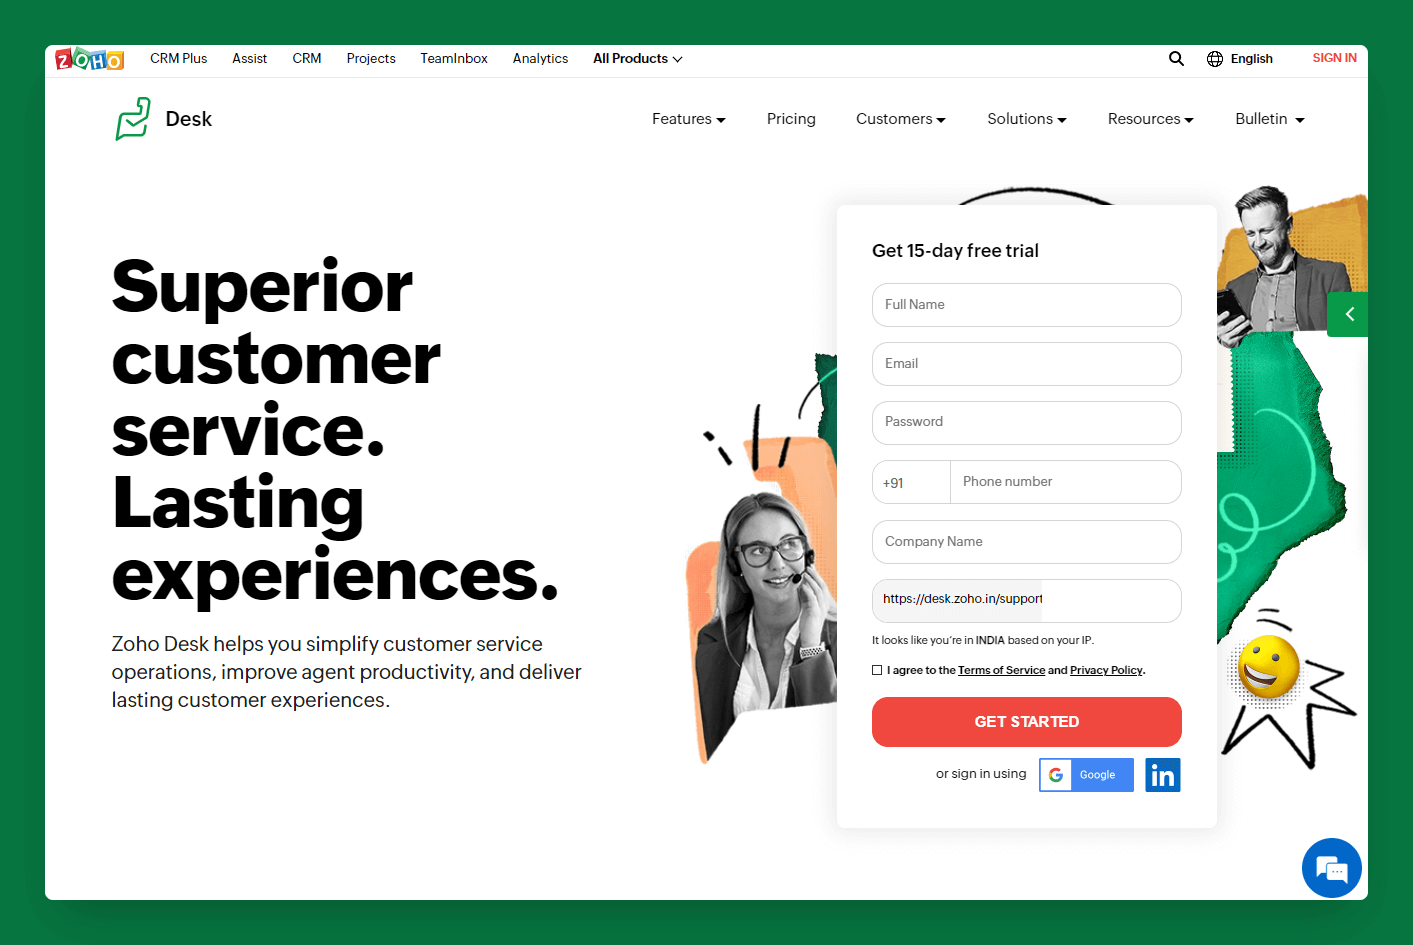 Zohodesk: comprehensive customer service and support platform to drive customer satisfaction